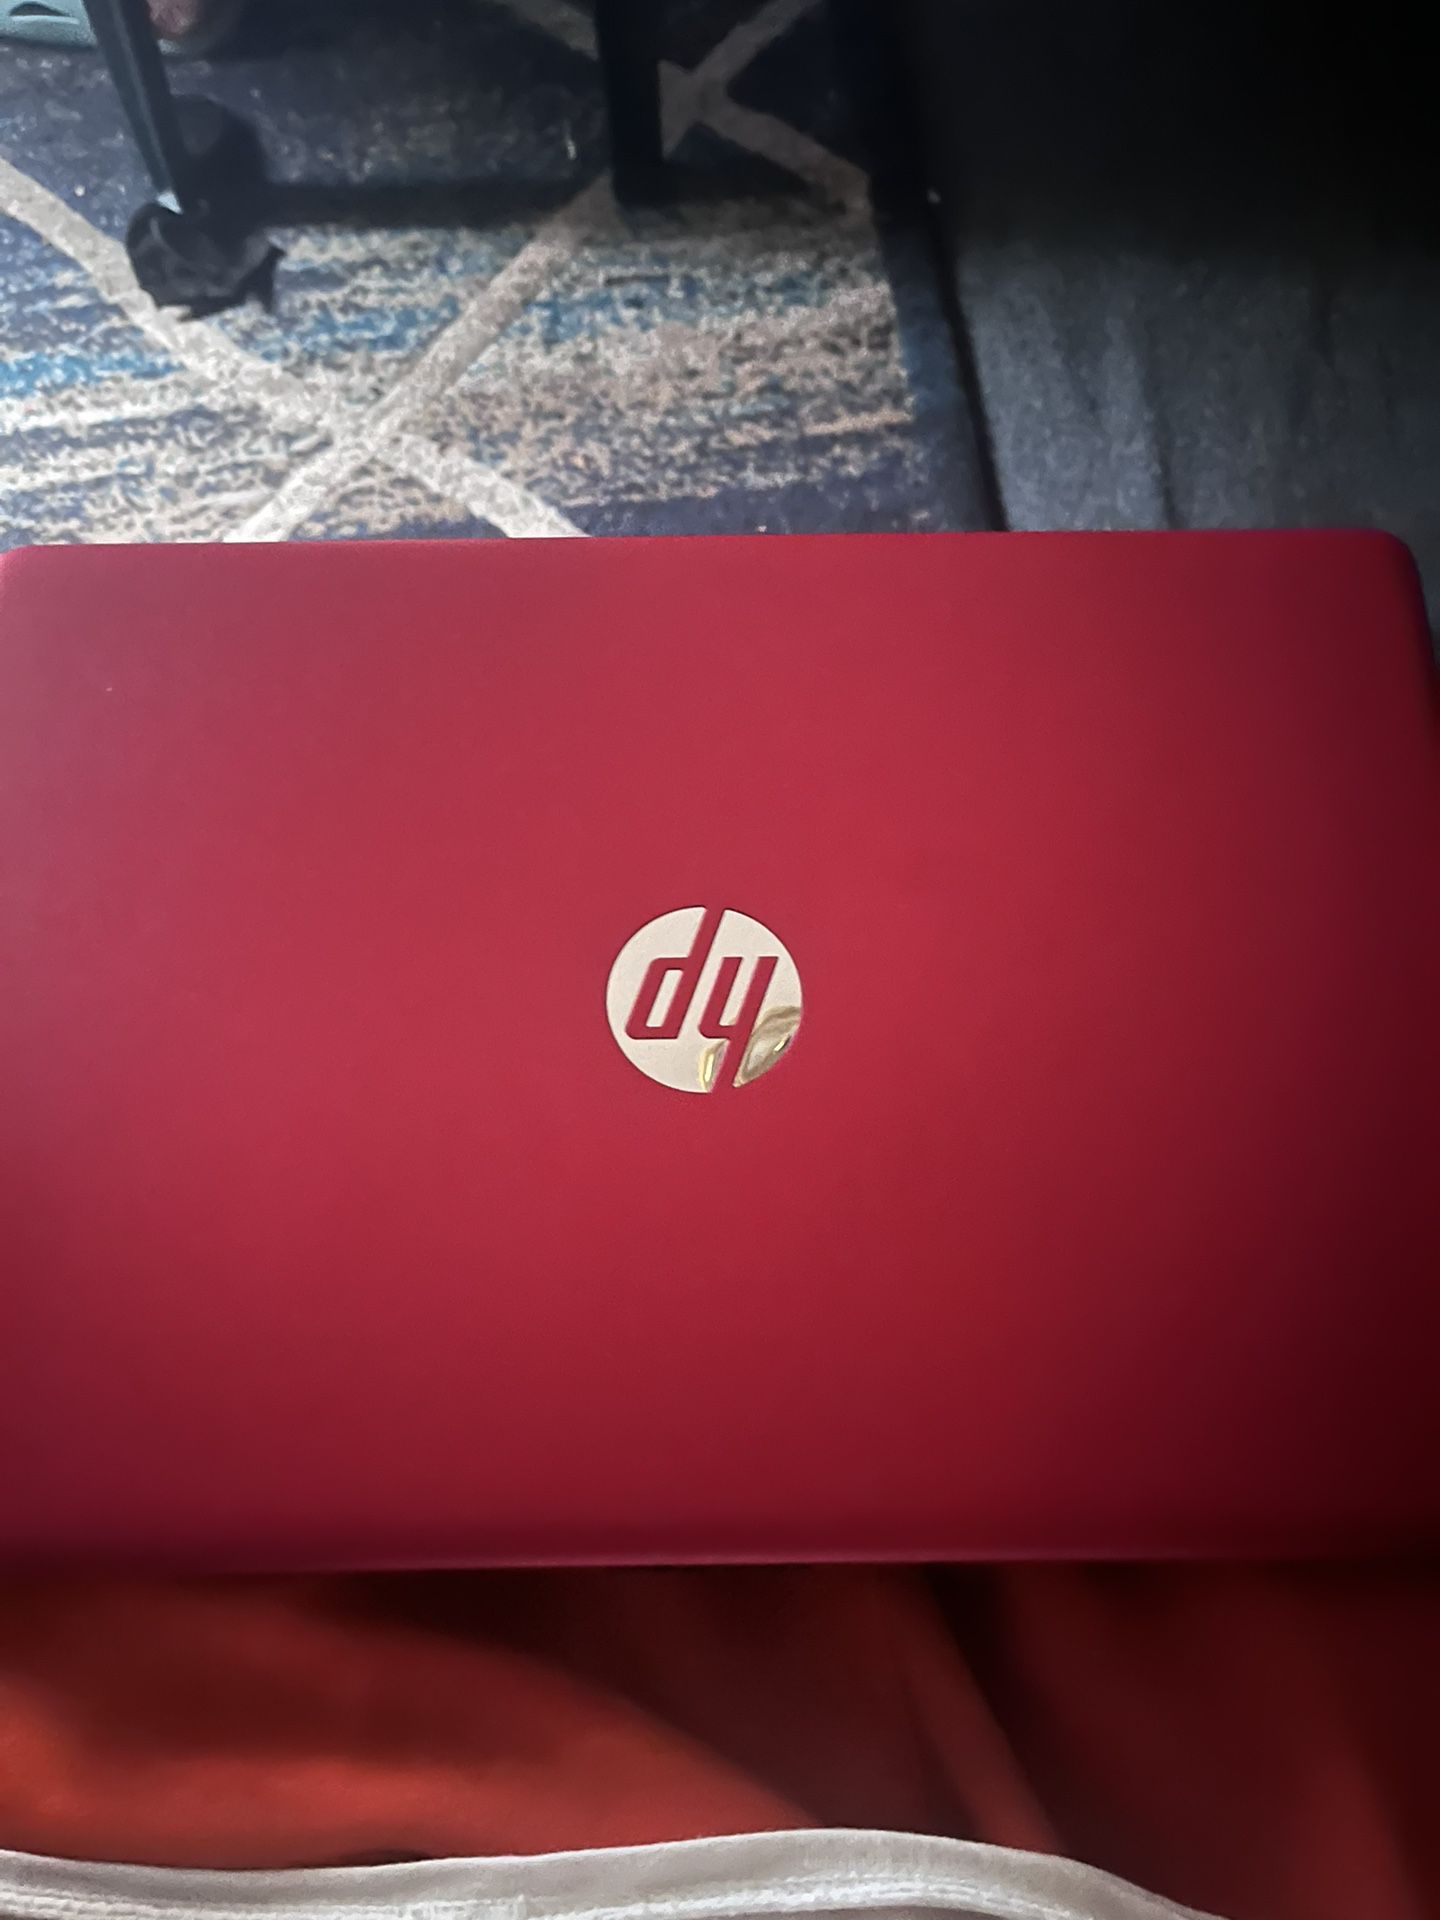 Hp Laptop For Sale 180-200 